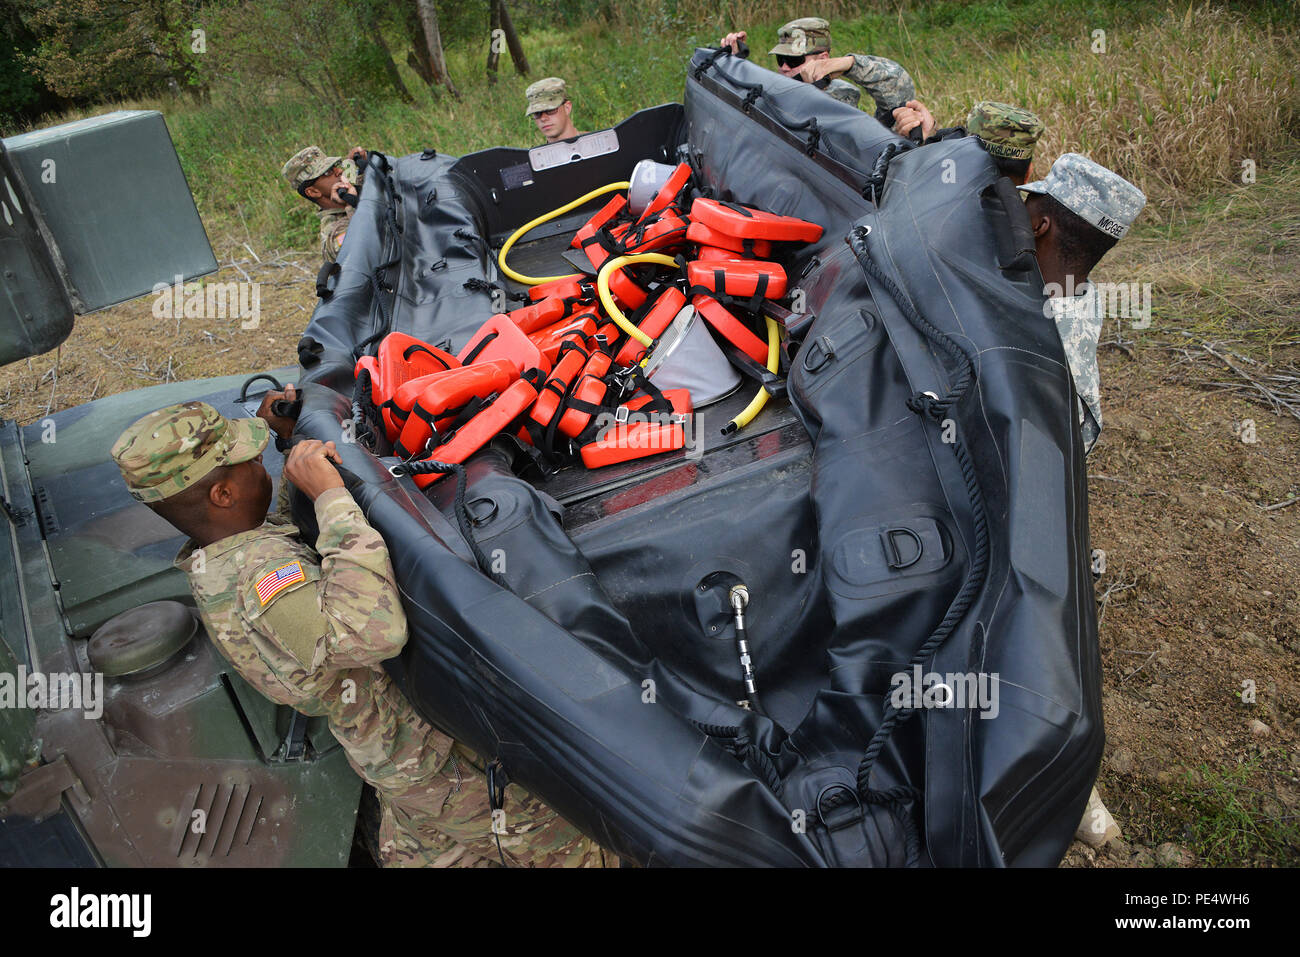 U.S. Army paratroopers, assigned to 1st Squadron, 91st Cavalry Regiment, 173rd Airborne Brigade, prepare a Zodiac inflatable boat as part of Exercise Sky Soldier II at Bechyne Training Area, Czech Republic, Sept. 22, 2015. Sky Soldier is a series of bilateral exercises between the 173rd Airborne Brigade and the Czech army’s 4th Rapid Reaction Brigades designed to increase interoperability and strengthen partnerships between NATO airborne forces. (U.S. Army photo by Visual Information Specialist Gertrud Zach/released) Stock Photo